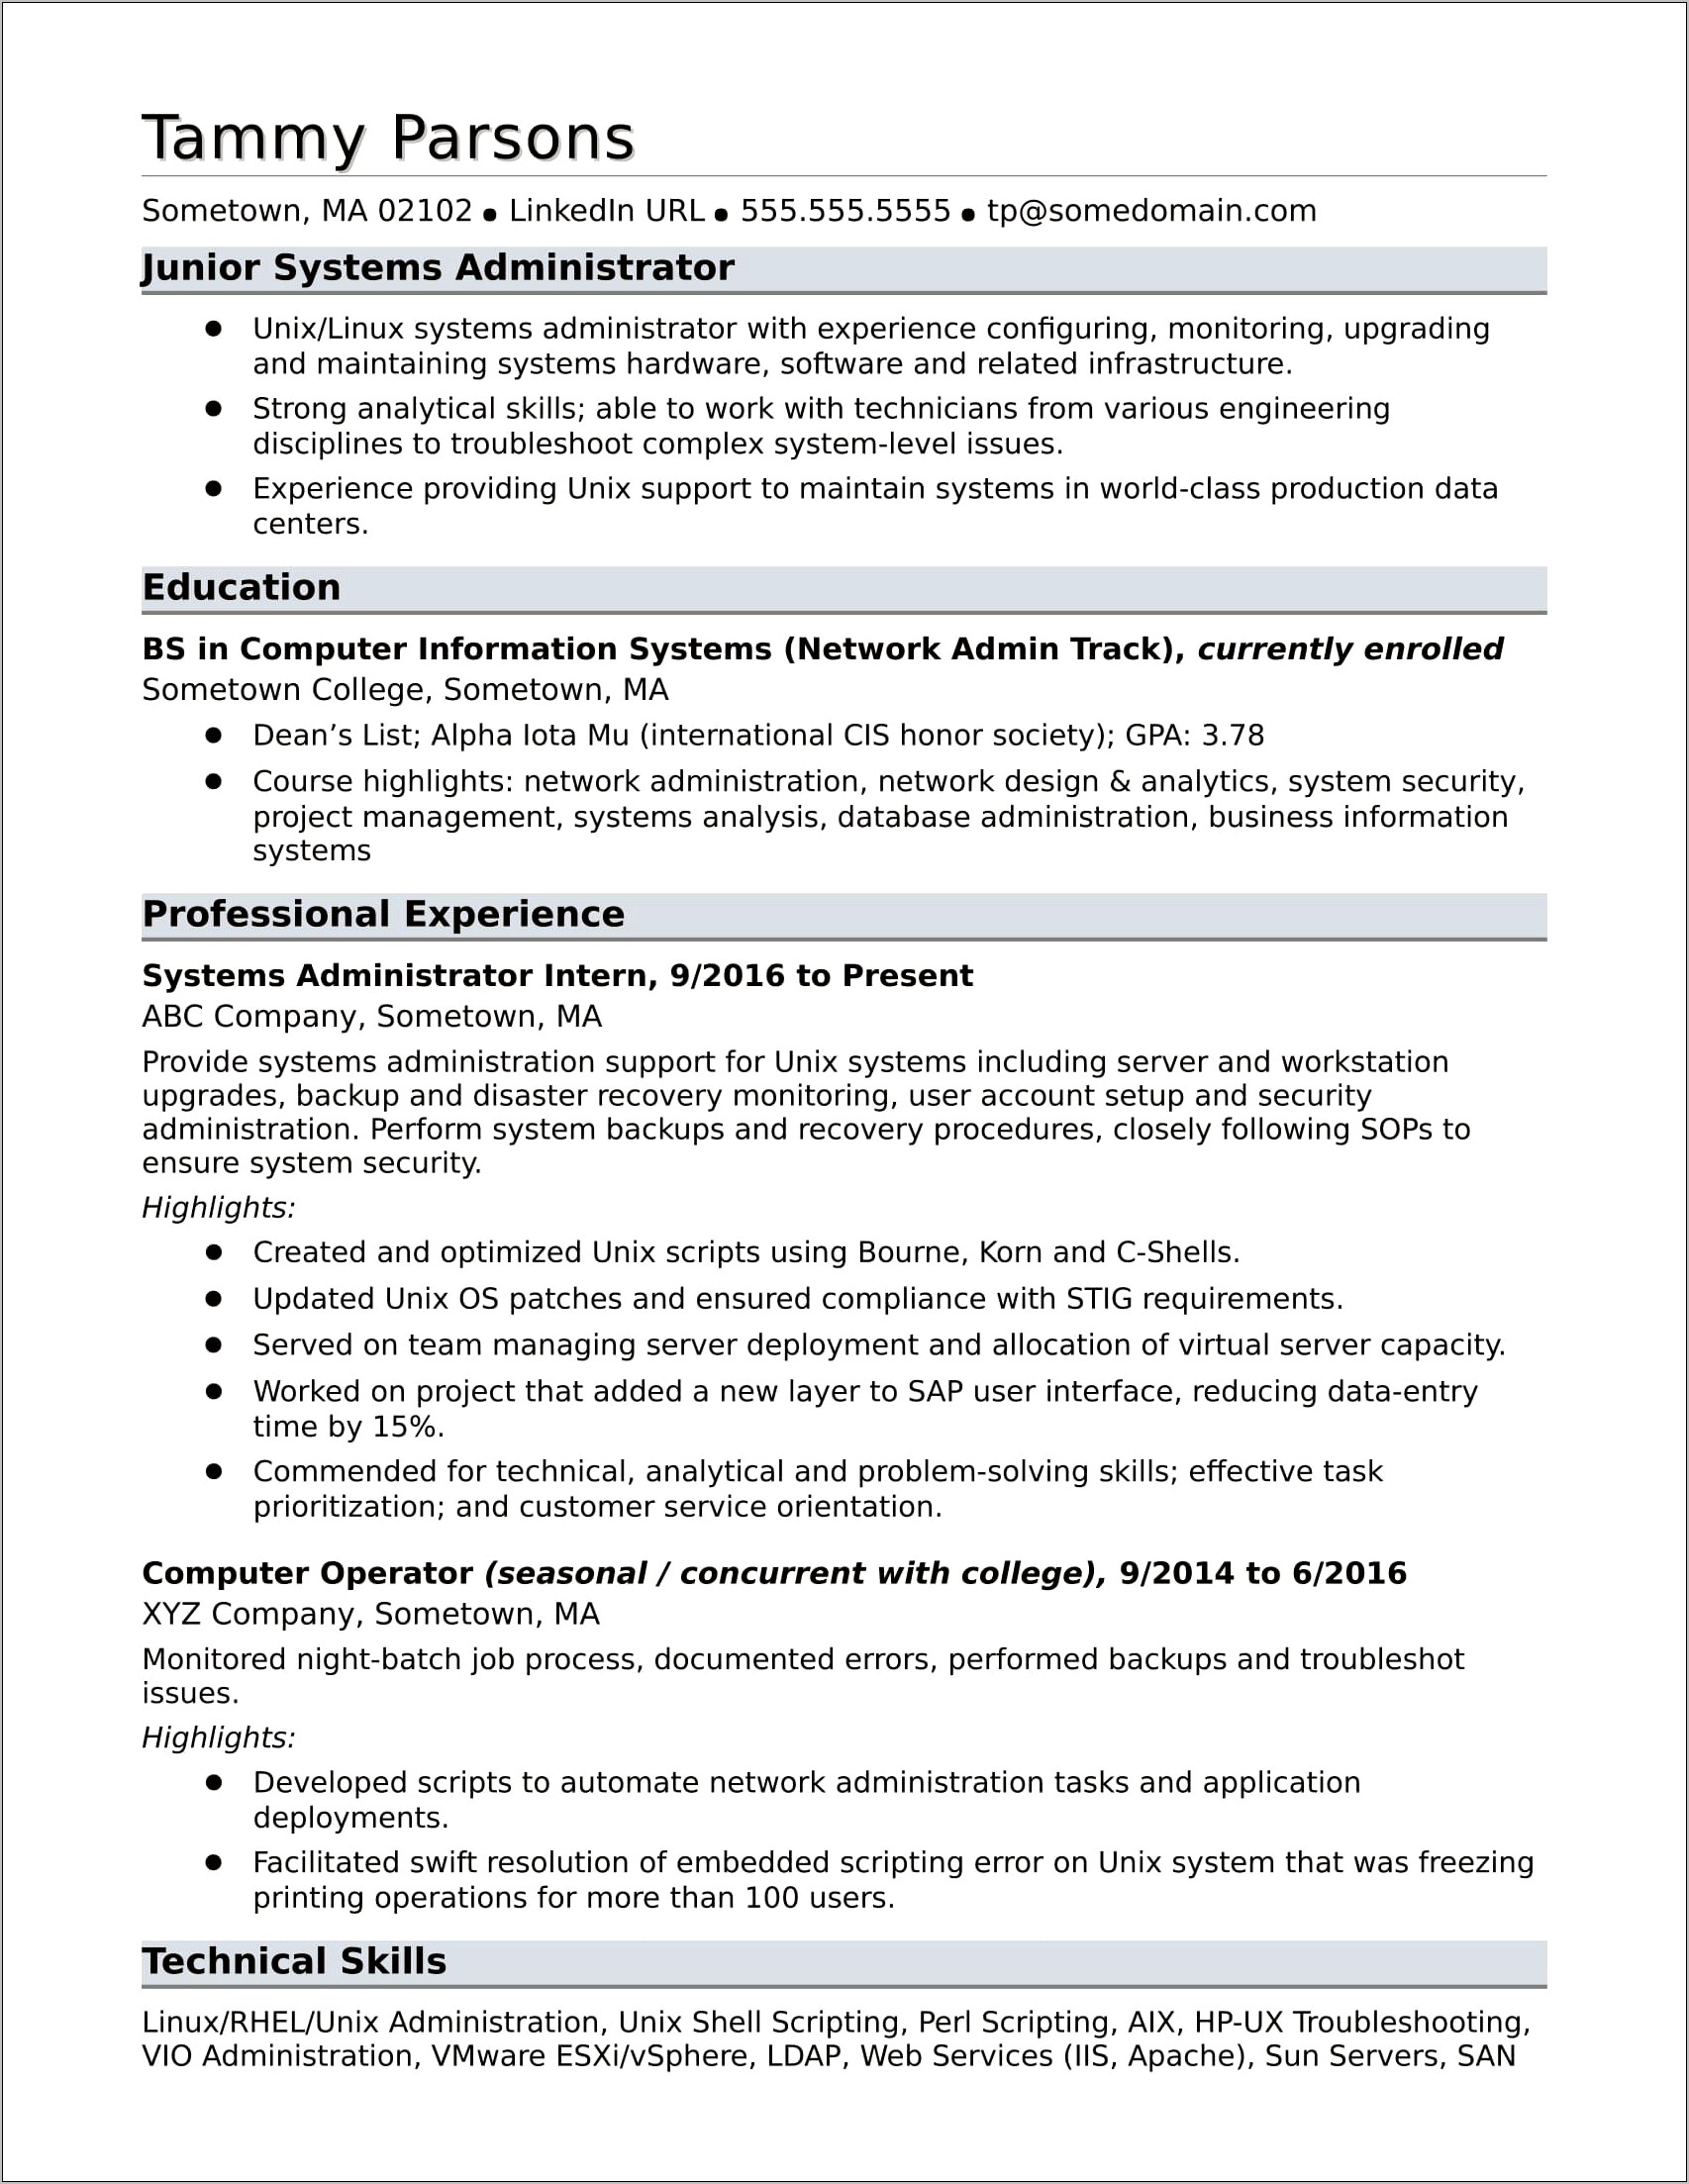 Cyber Security Analyst Resume Skills Entry Level